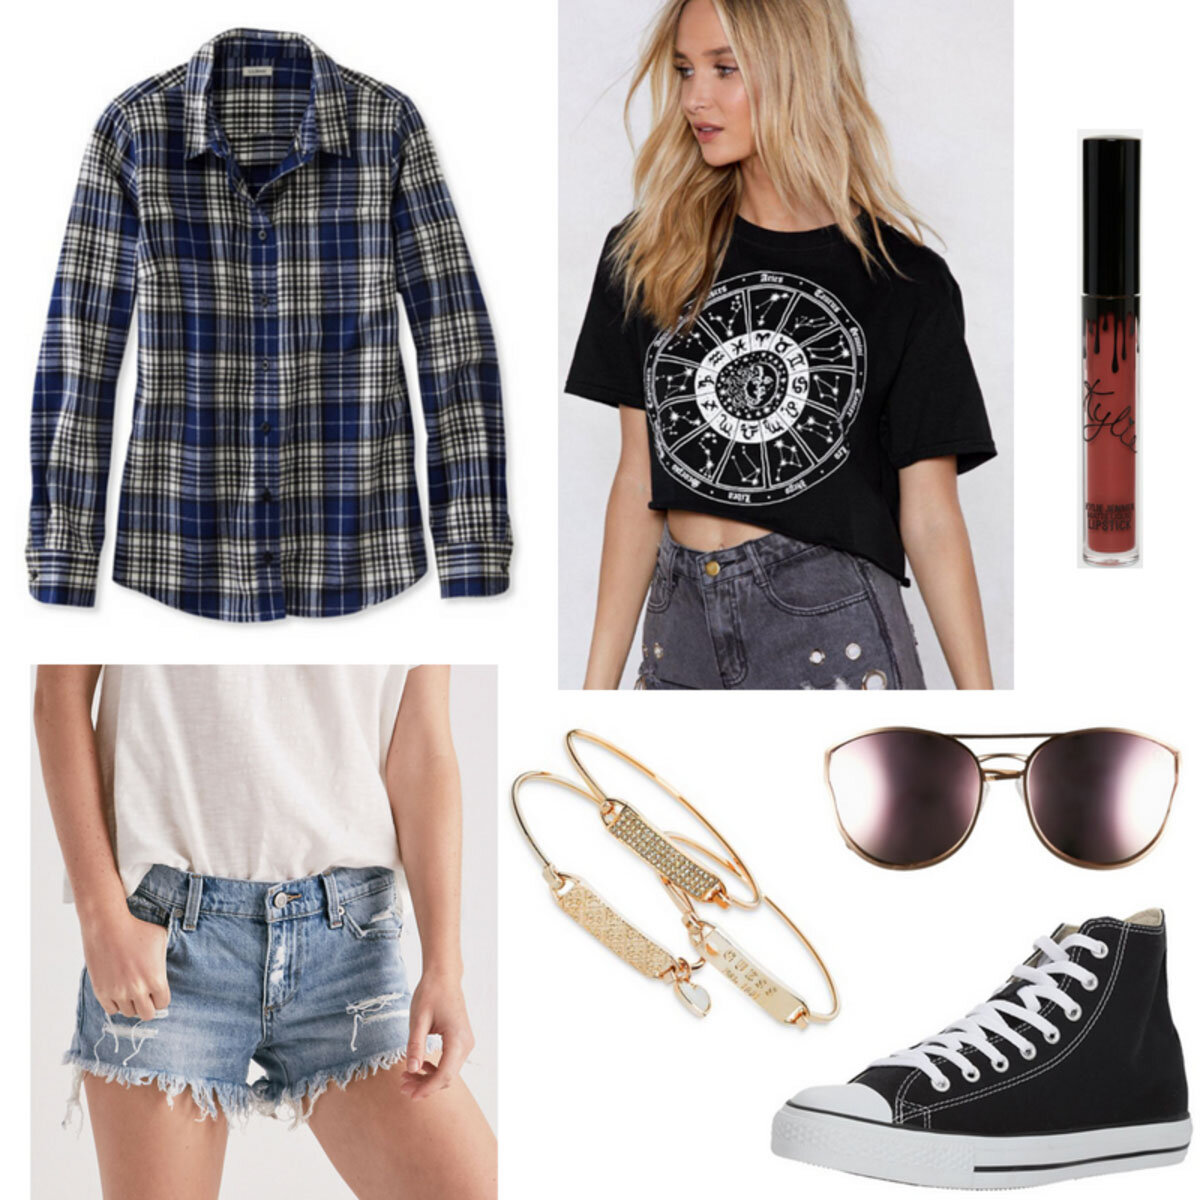 Check styling ideas for「Flannel Checked Shirt、High-Rise Denim Shorts」